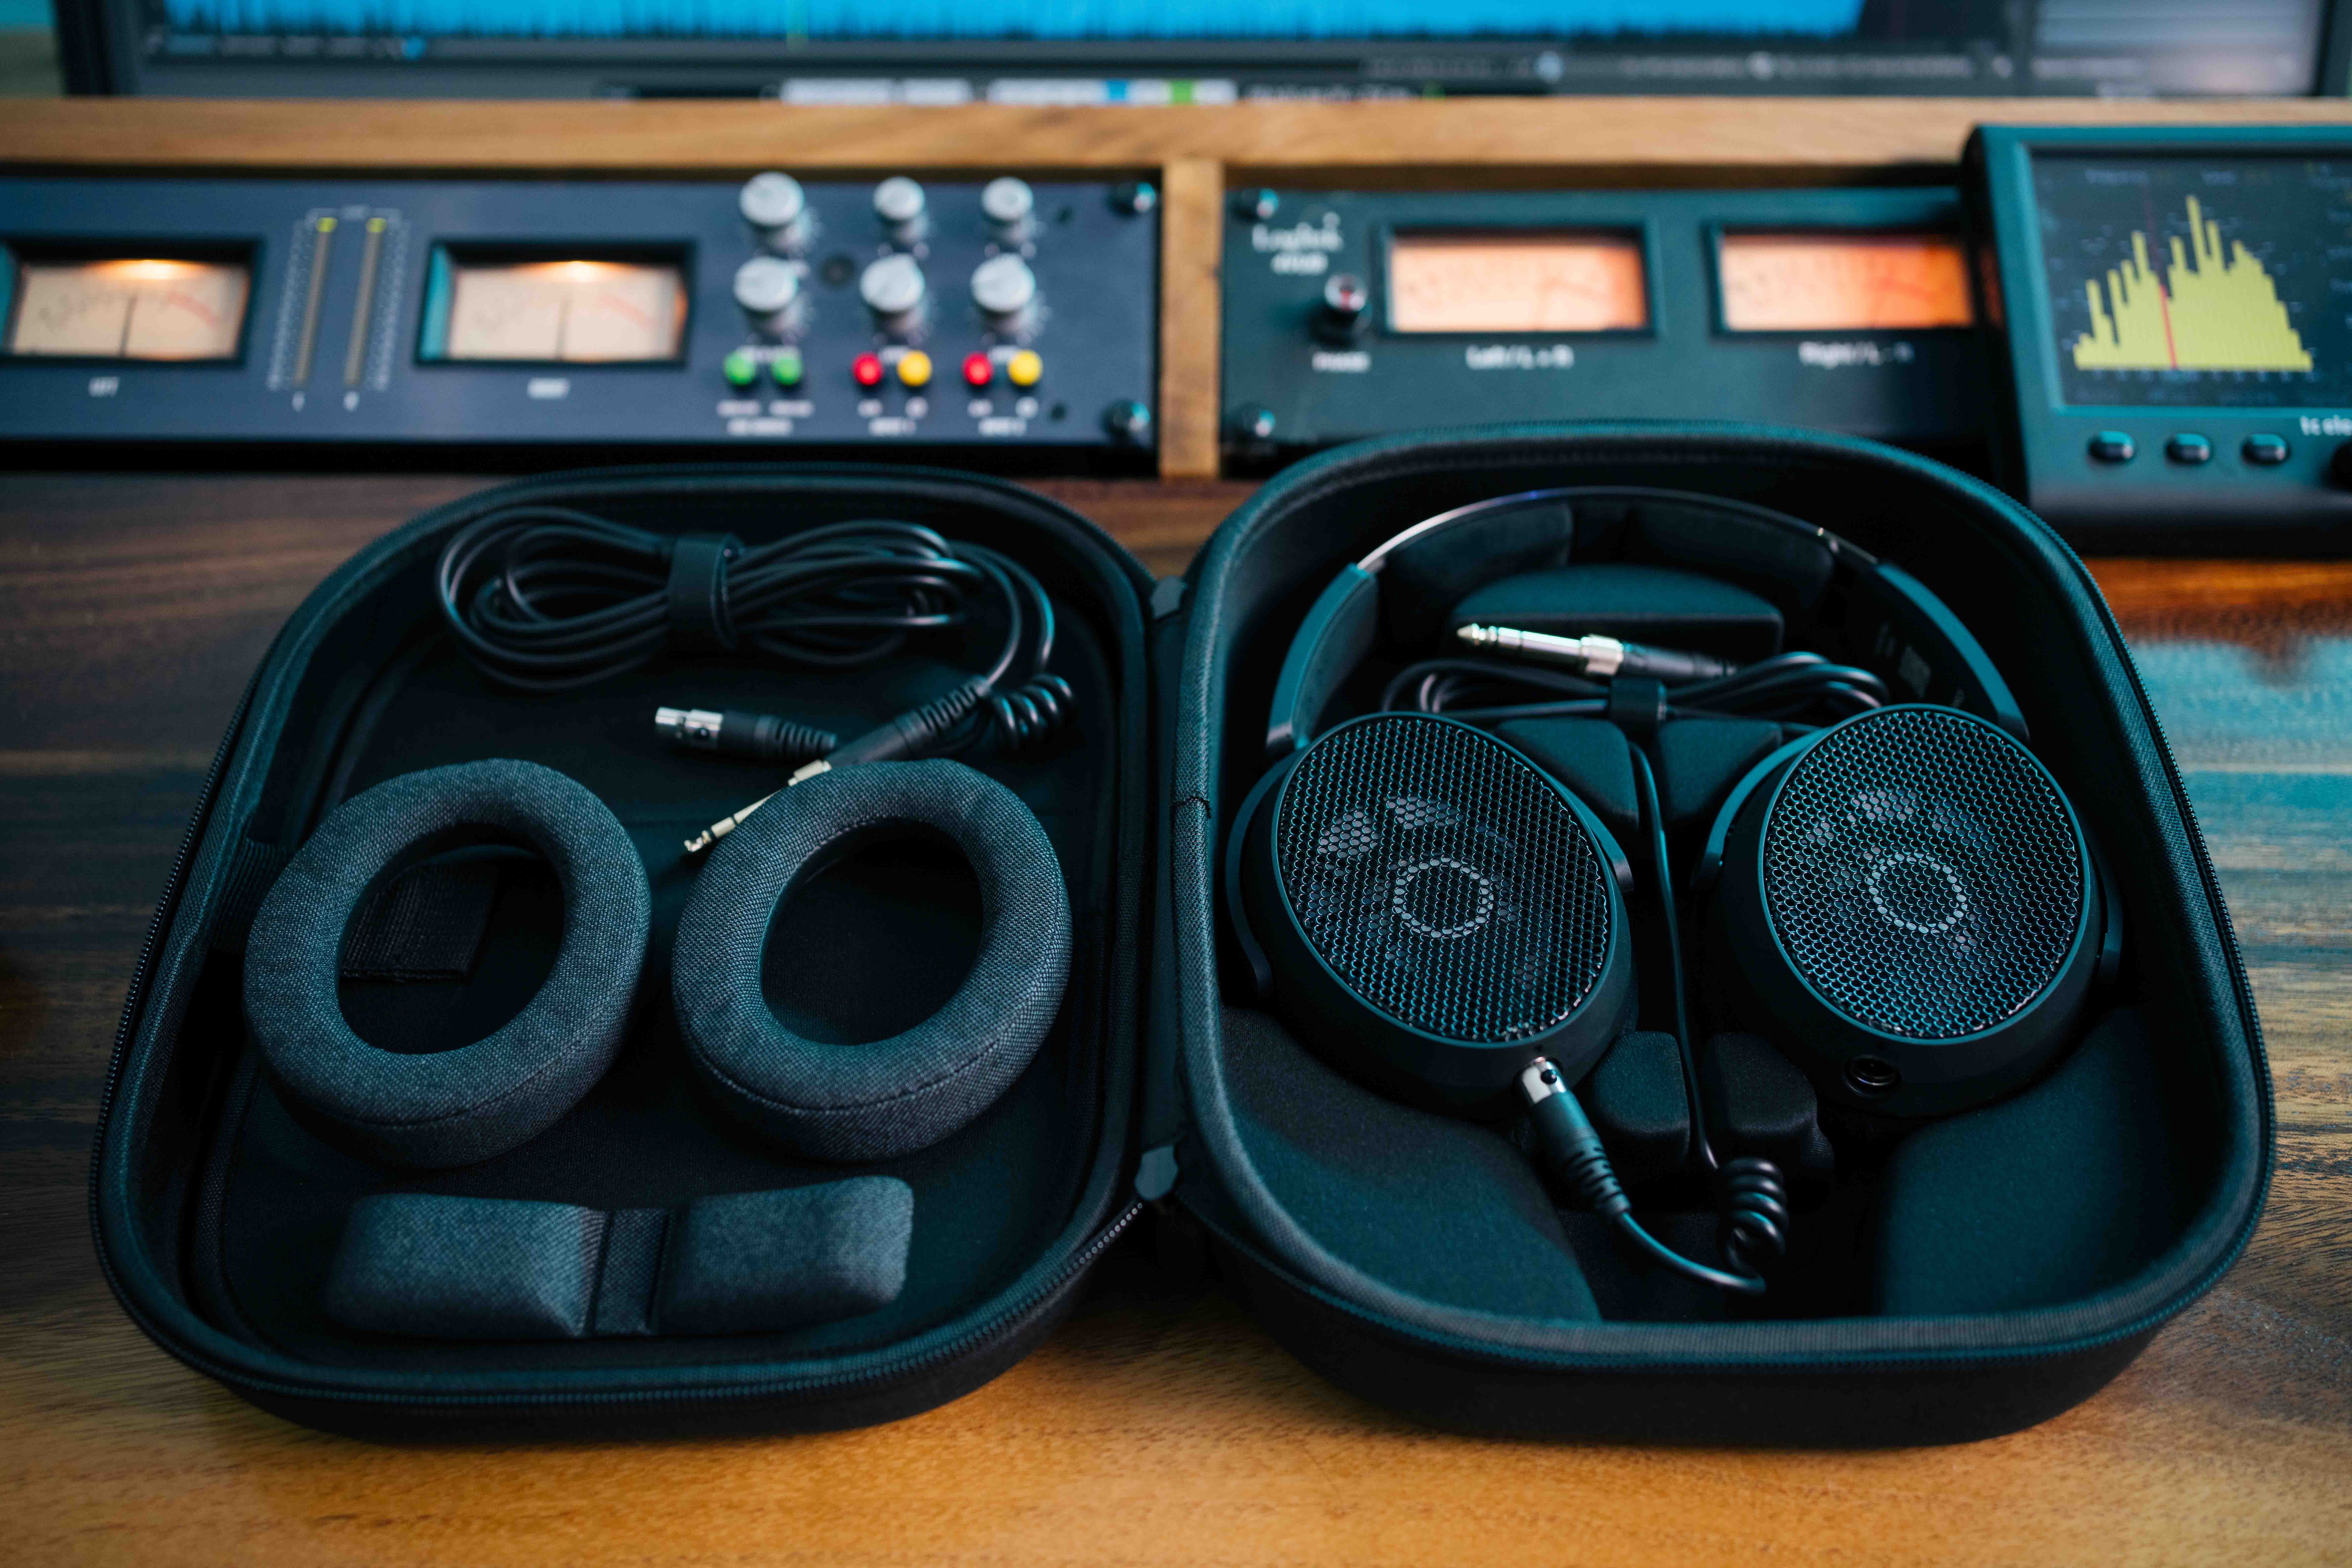 The HD 490 PRO Plus (pictured) includes a case, additional 3 m headphone cable and an extra fabric headband pad